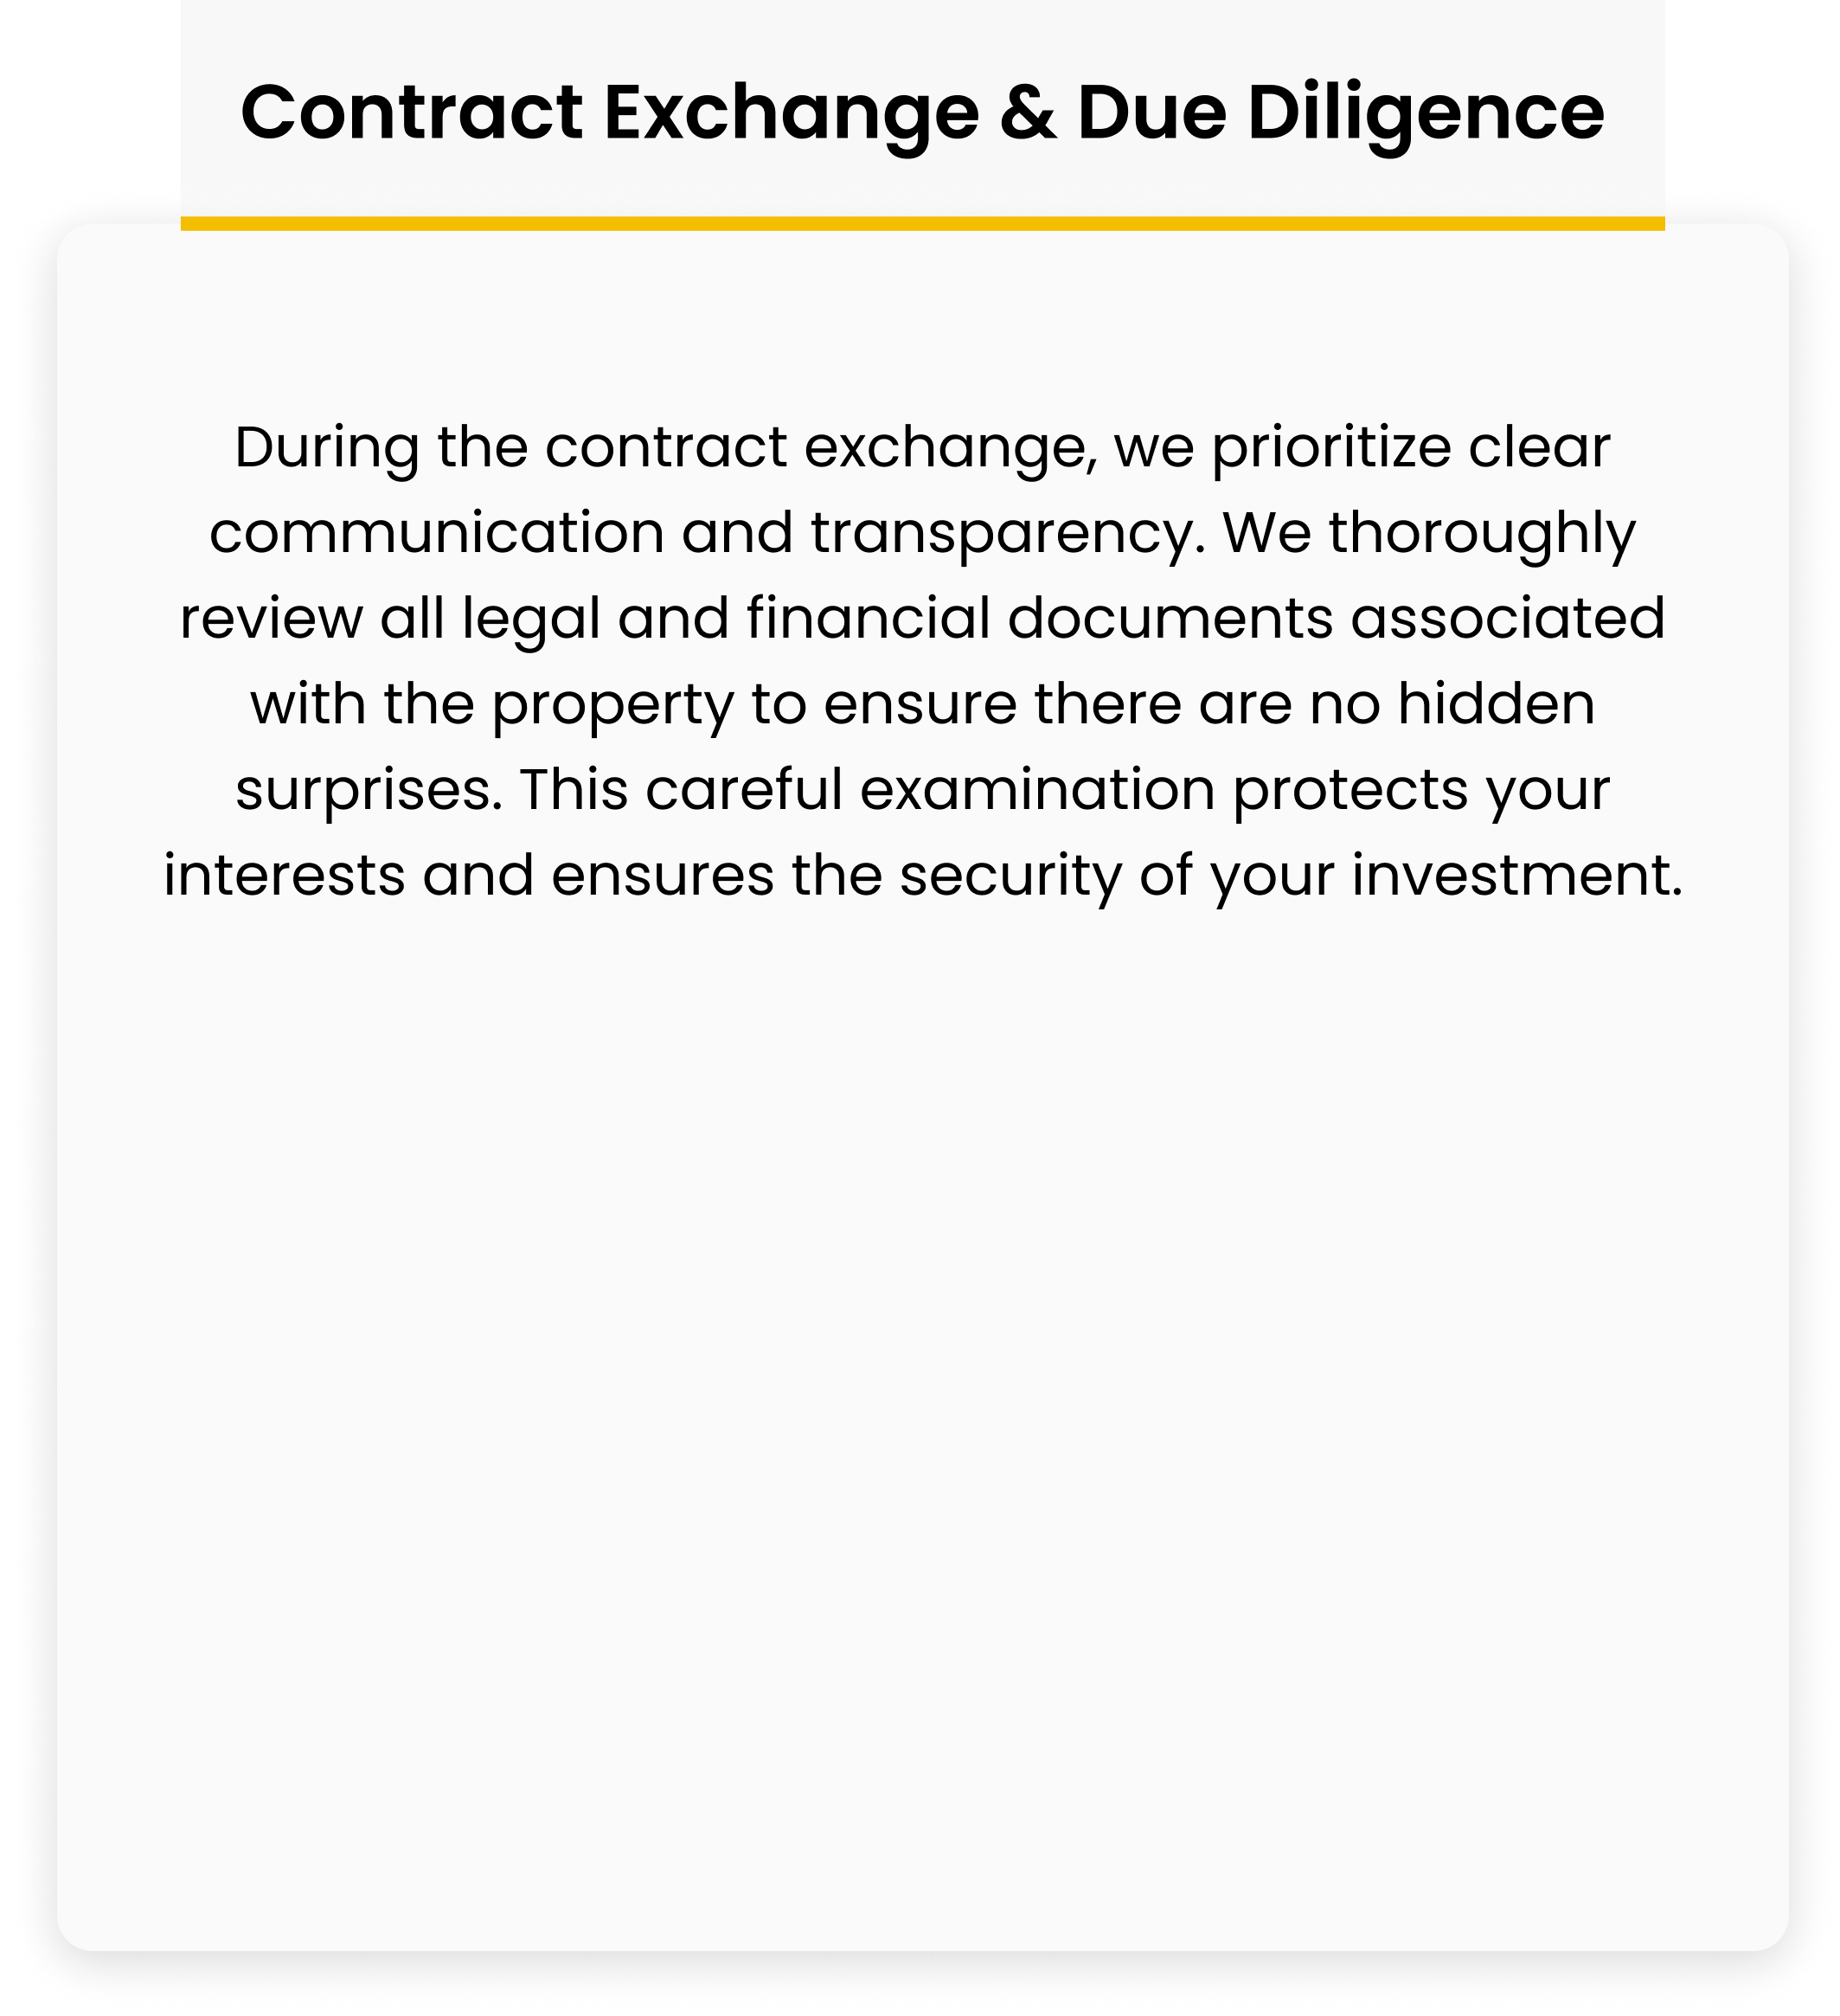 Contract Exchange & Due Diligence